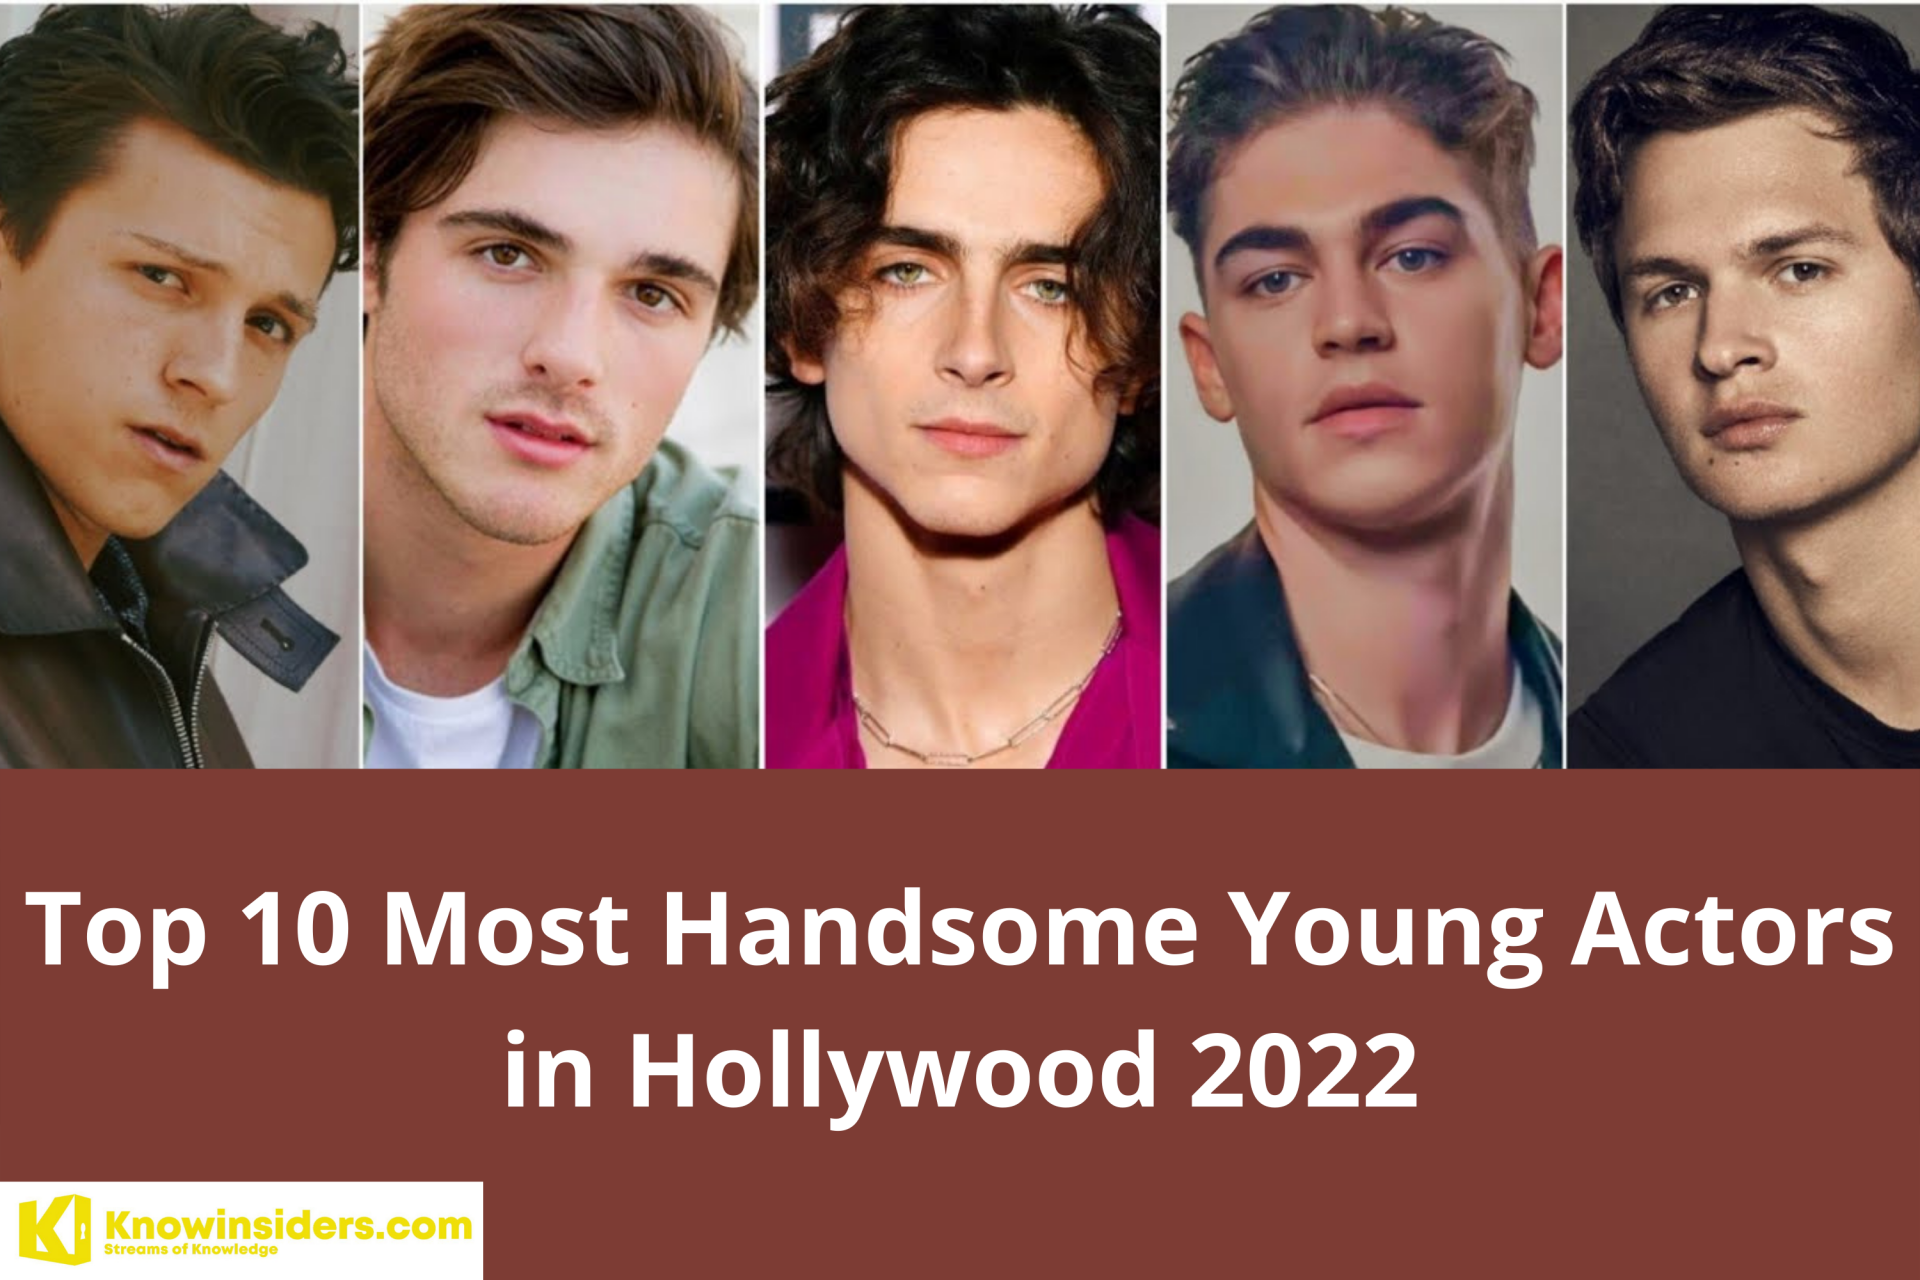 Top 10 Most Handsome & Hottest Young Actors in Hollywood 2022/2023